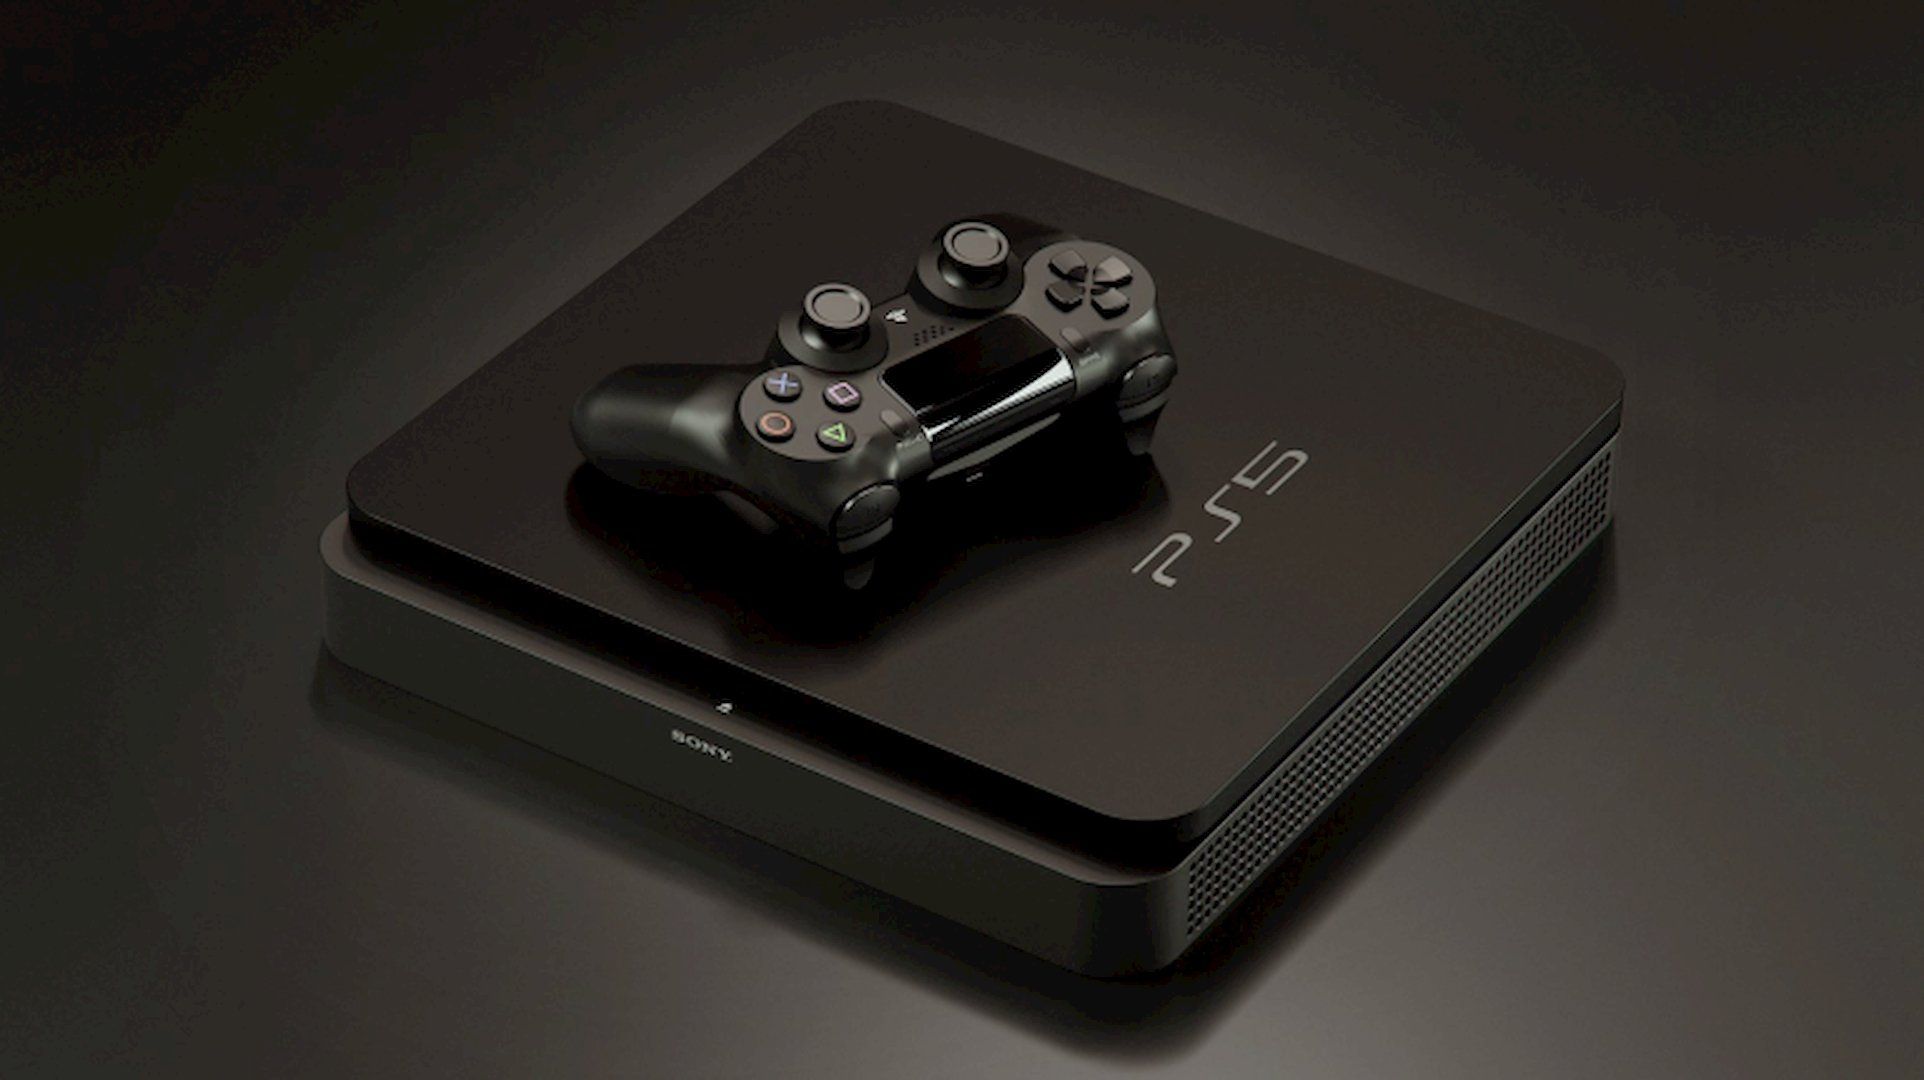 We still don't really know what the PS5 looks like.